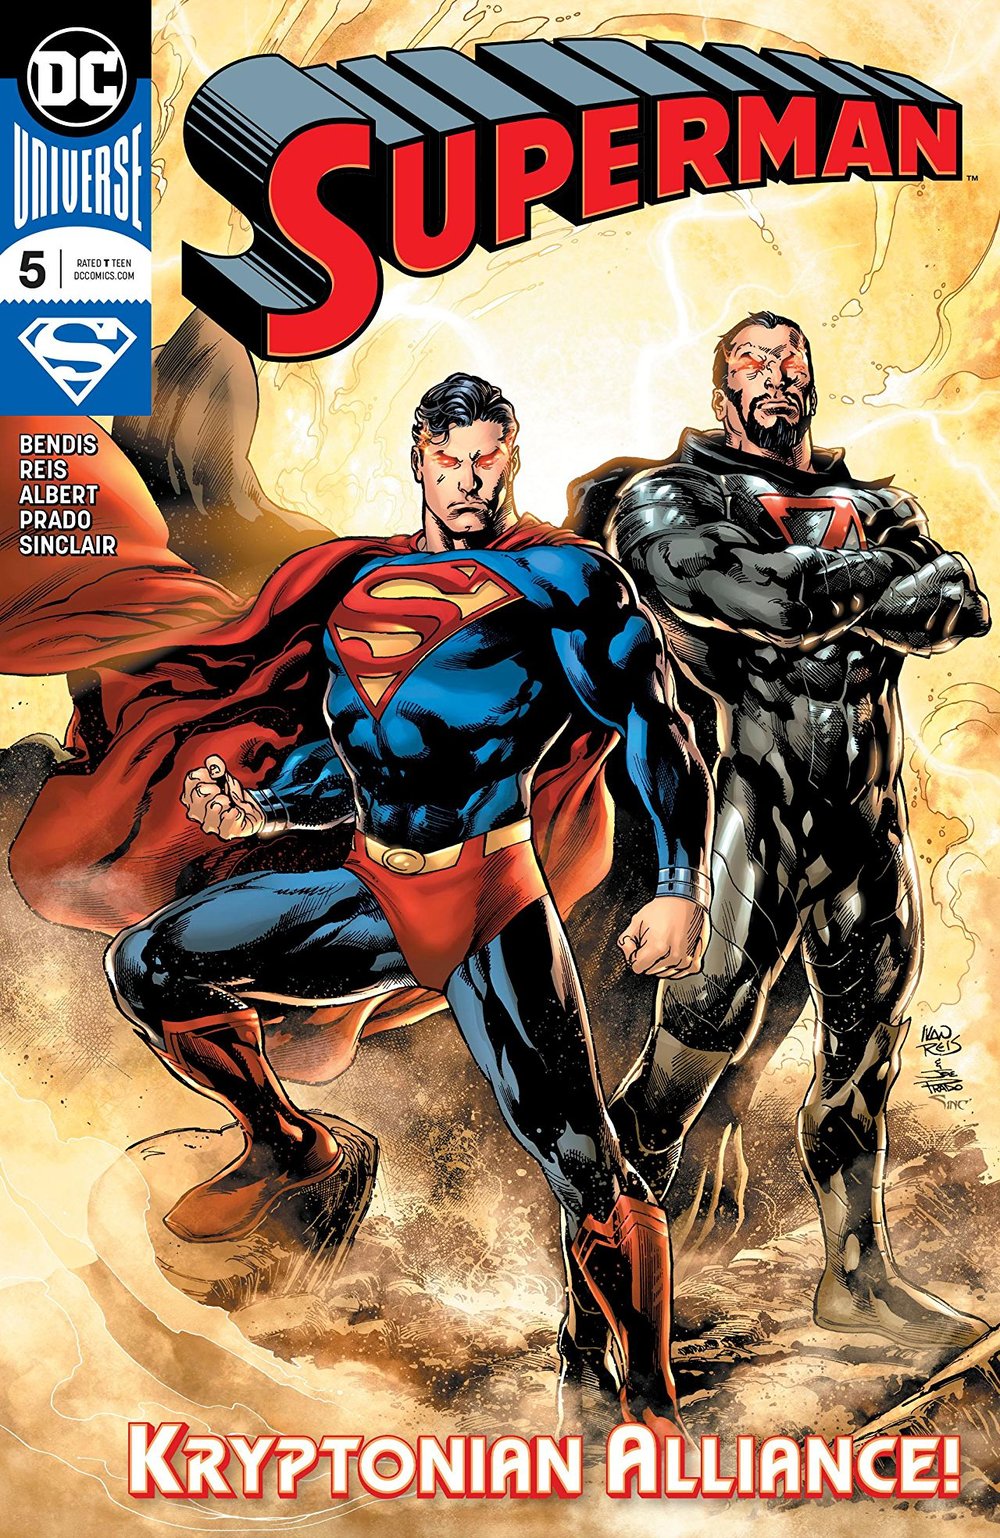 Superman issue 5 review